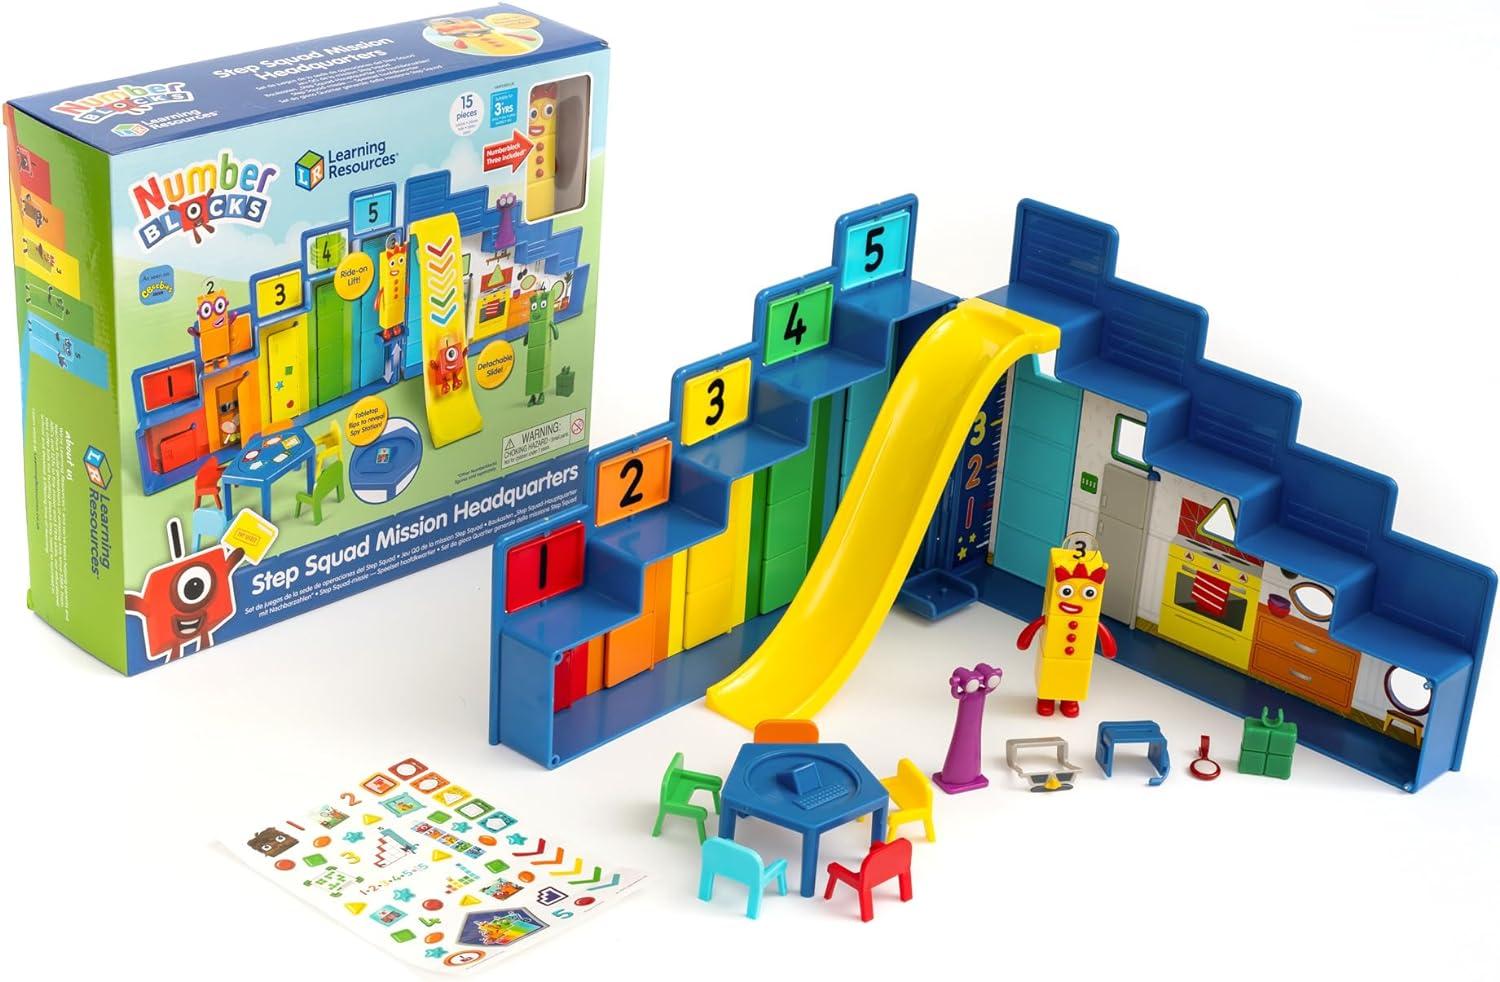 Learning Resources Numberblocks Step Squad Mission Headquarters Deluxe Playset